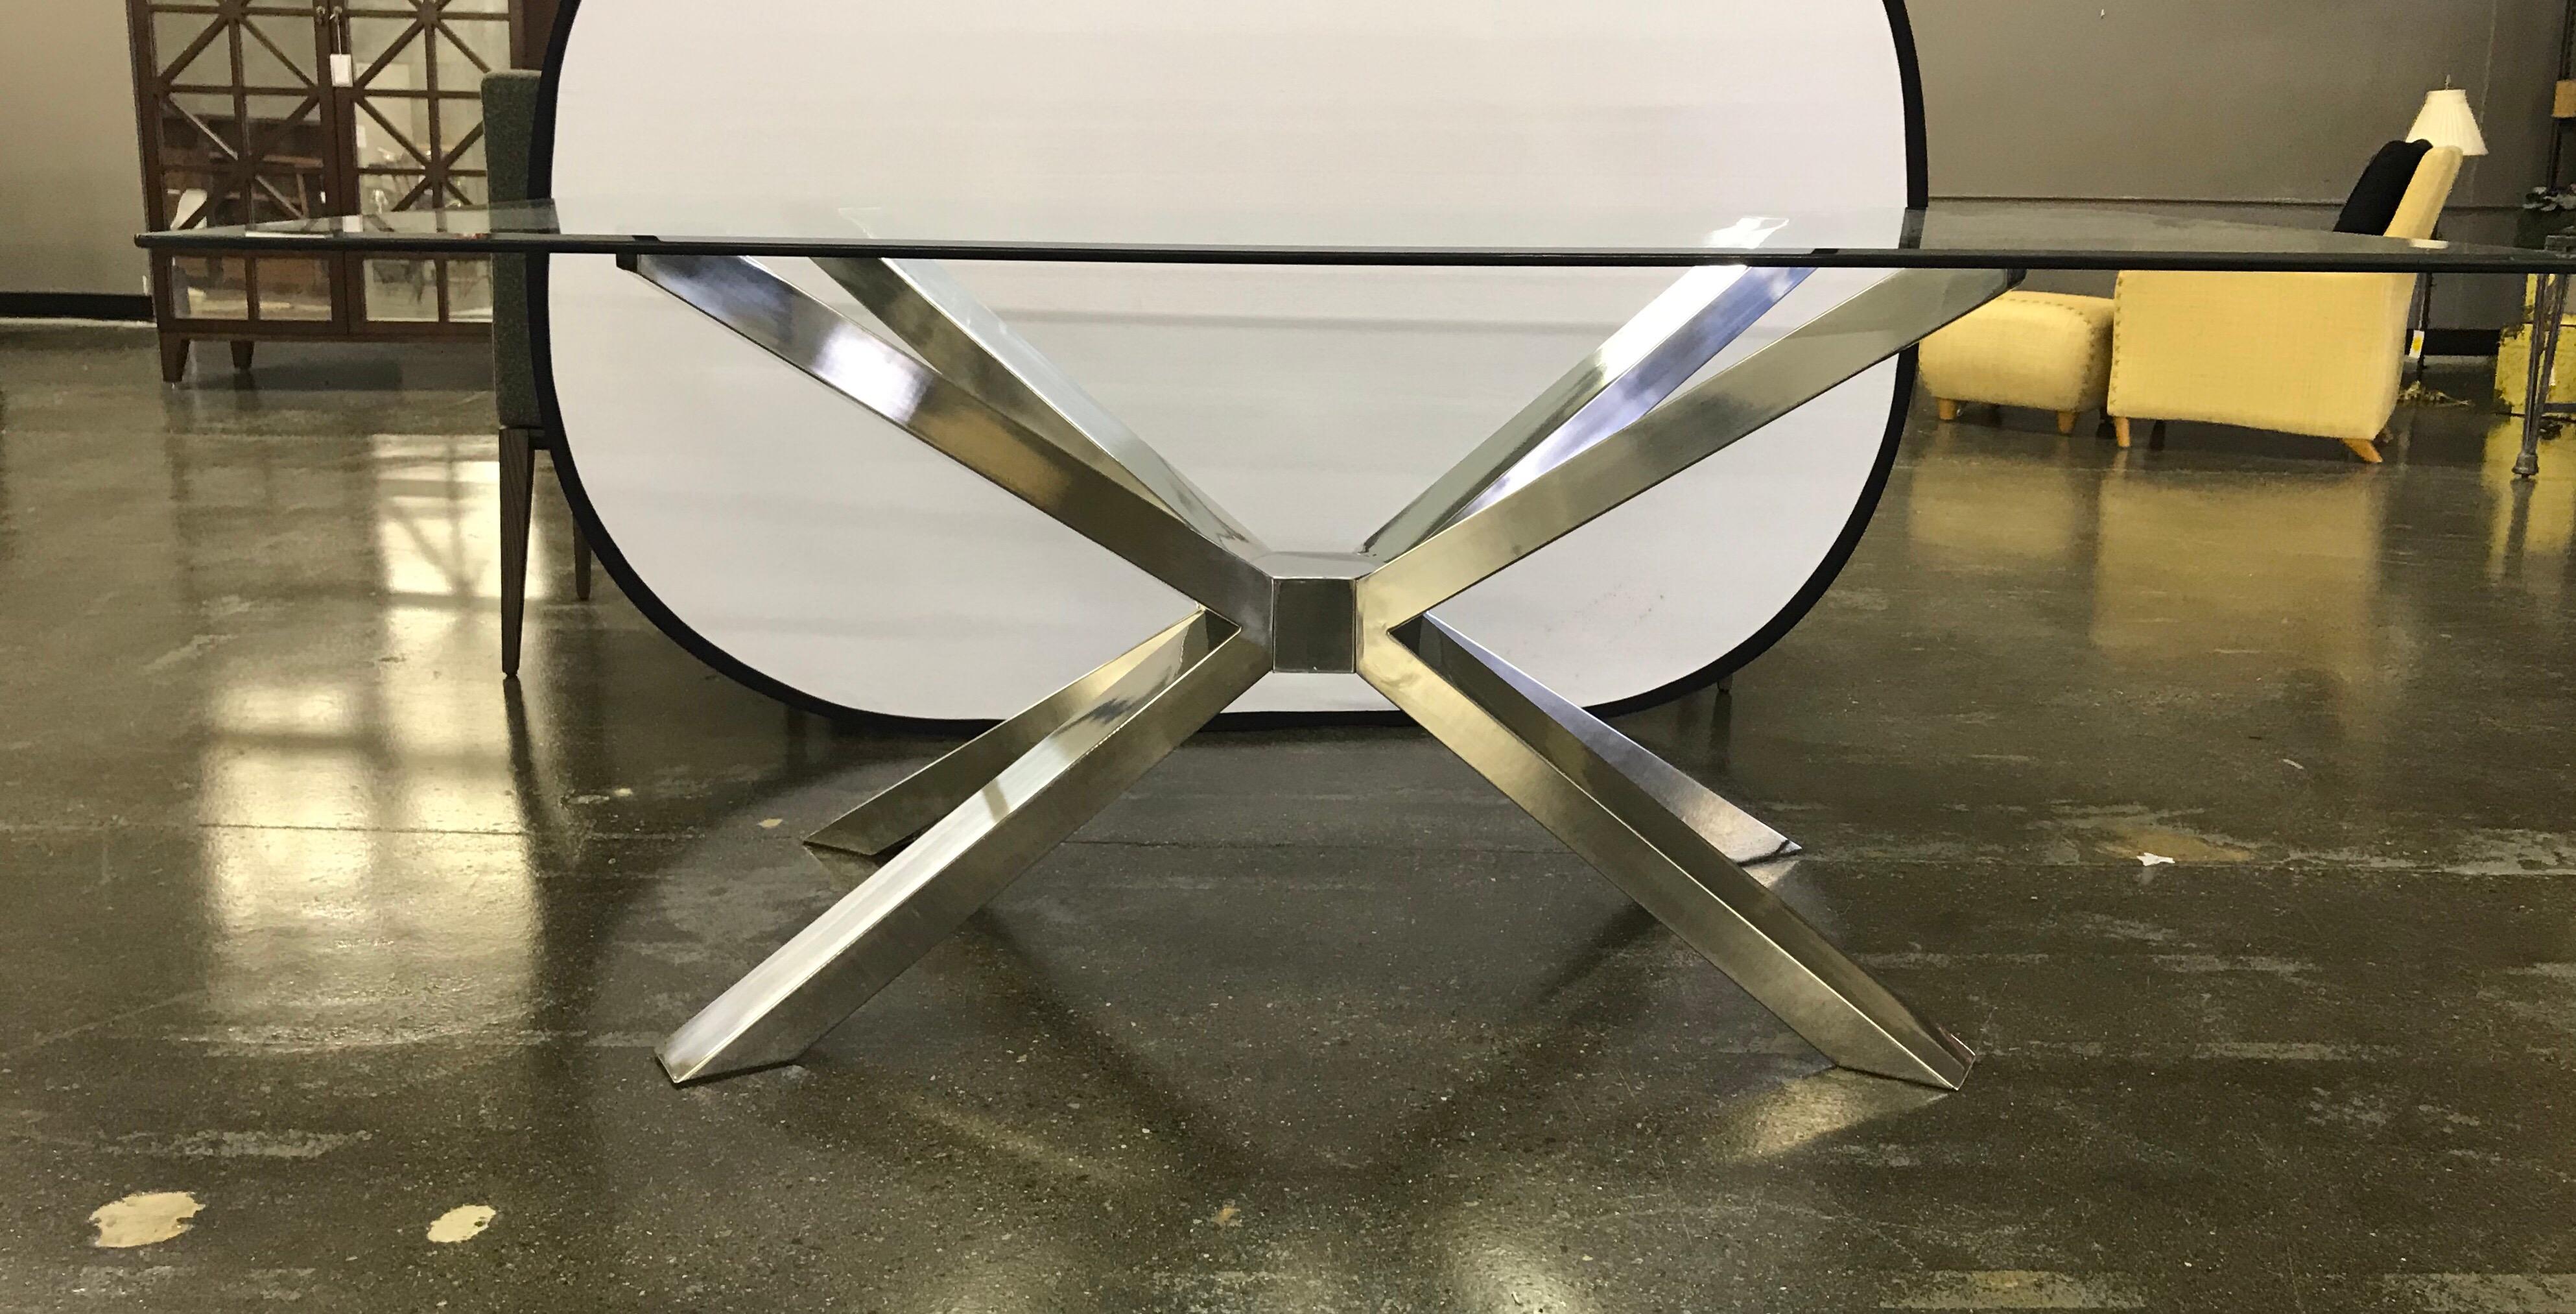 Sleek and sophisticated glass top dining table has a silver chrome sculptural base. 
The condition is mint and the base has spectacular architectural lines.